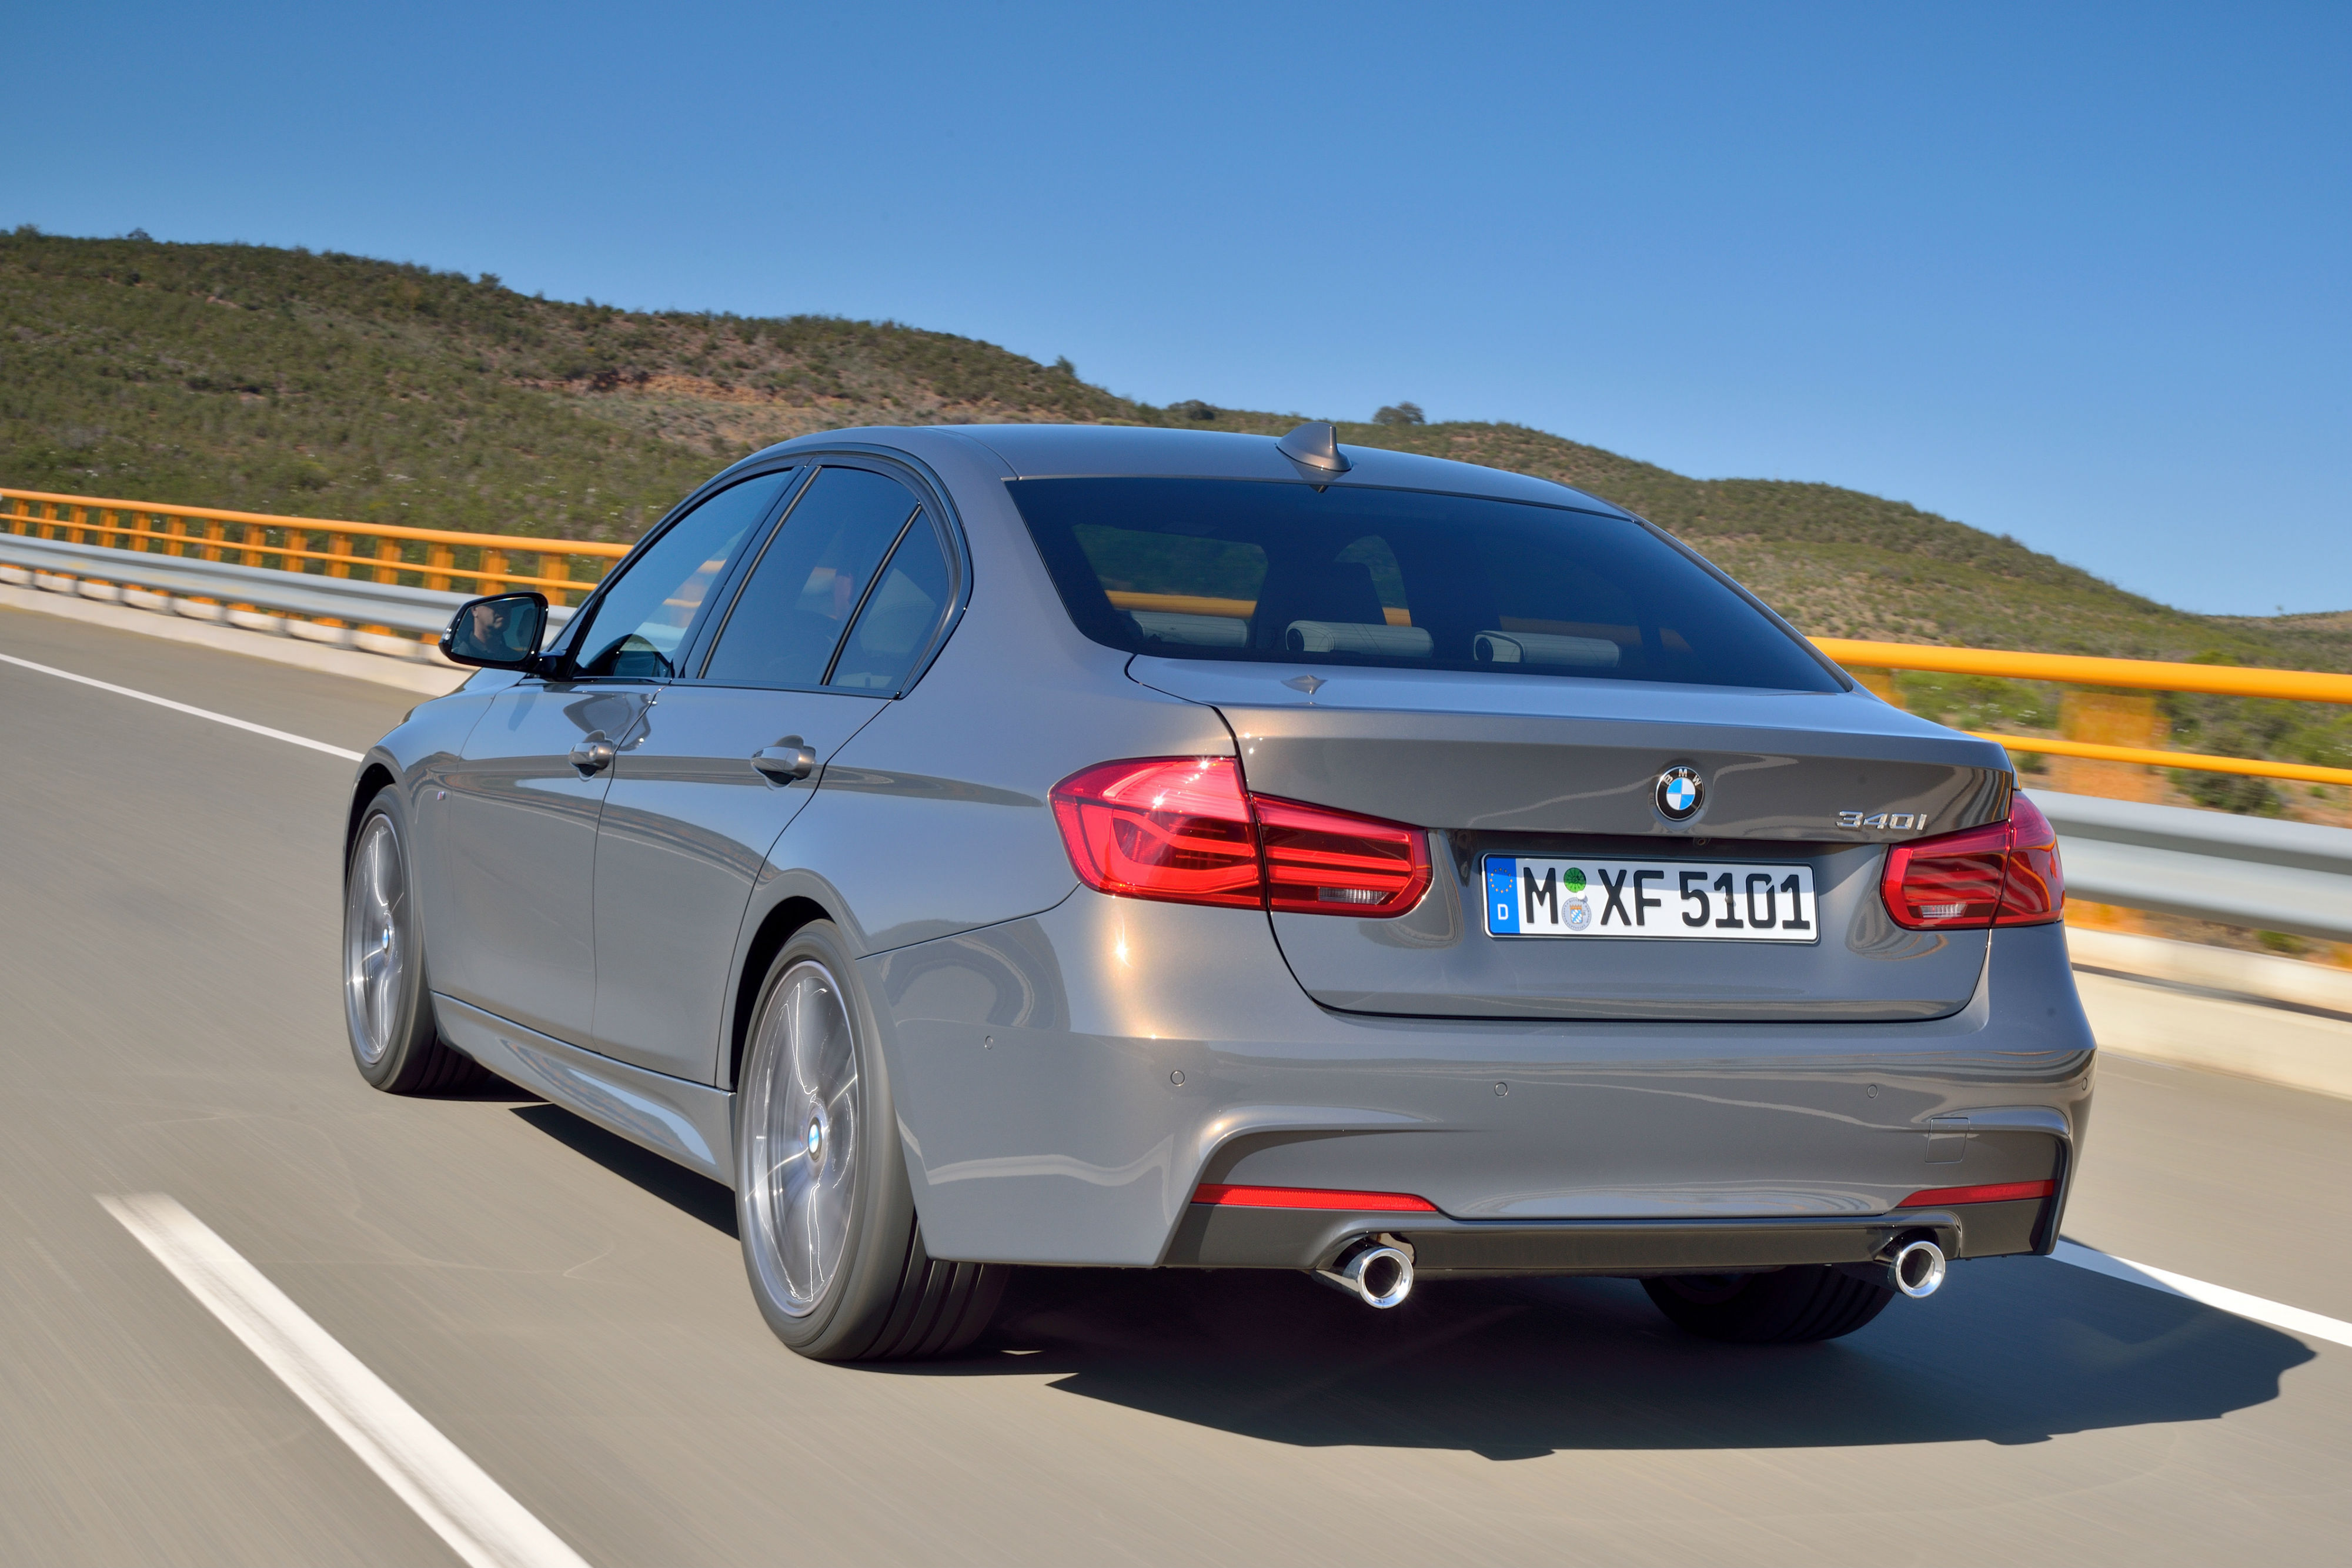 BMW 3-series saloon 2015 facelift rear view